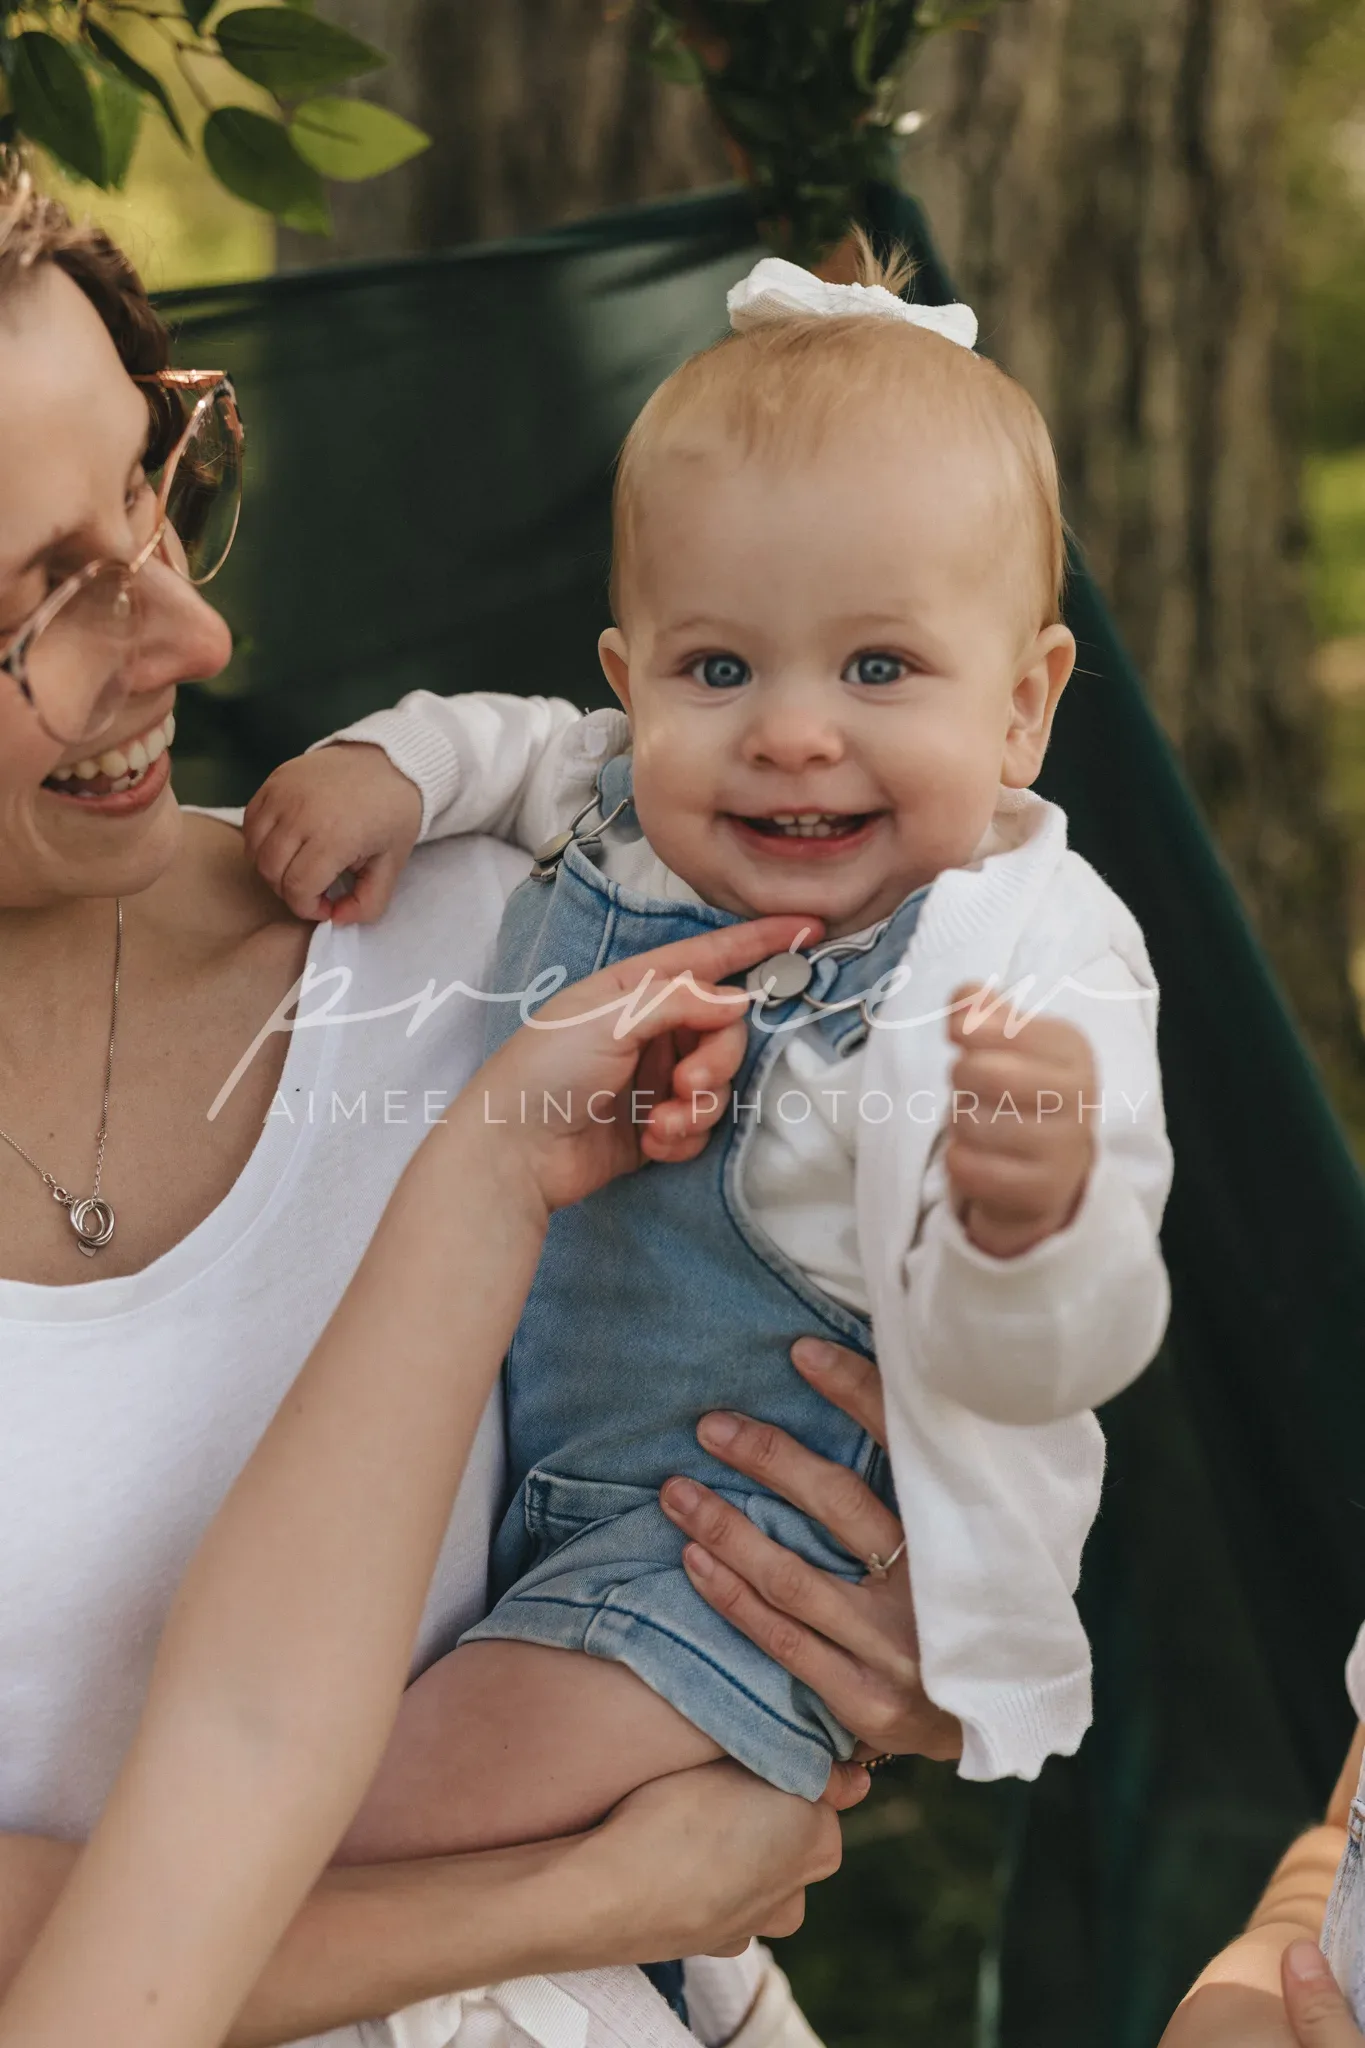 A joyful young woman with short brown hair smiles while holding a laughing baby dressed in a white shirt and denim overalls. they are outdoors, with trees in the background. the text "aimee lincé photography" is overlayed.